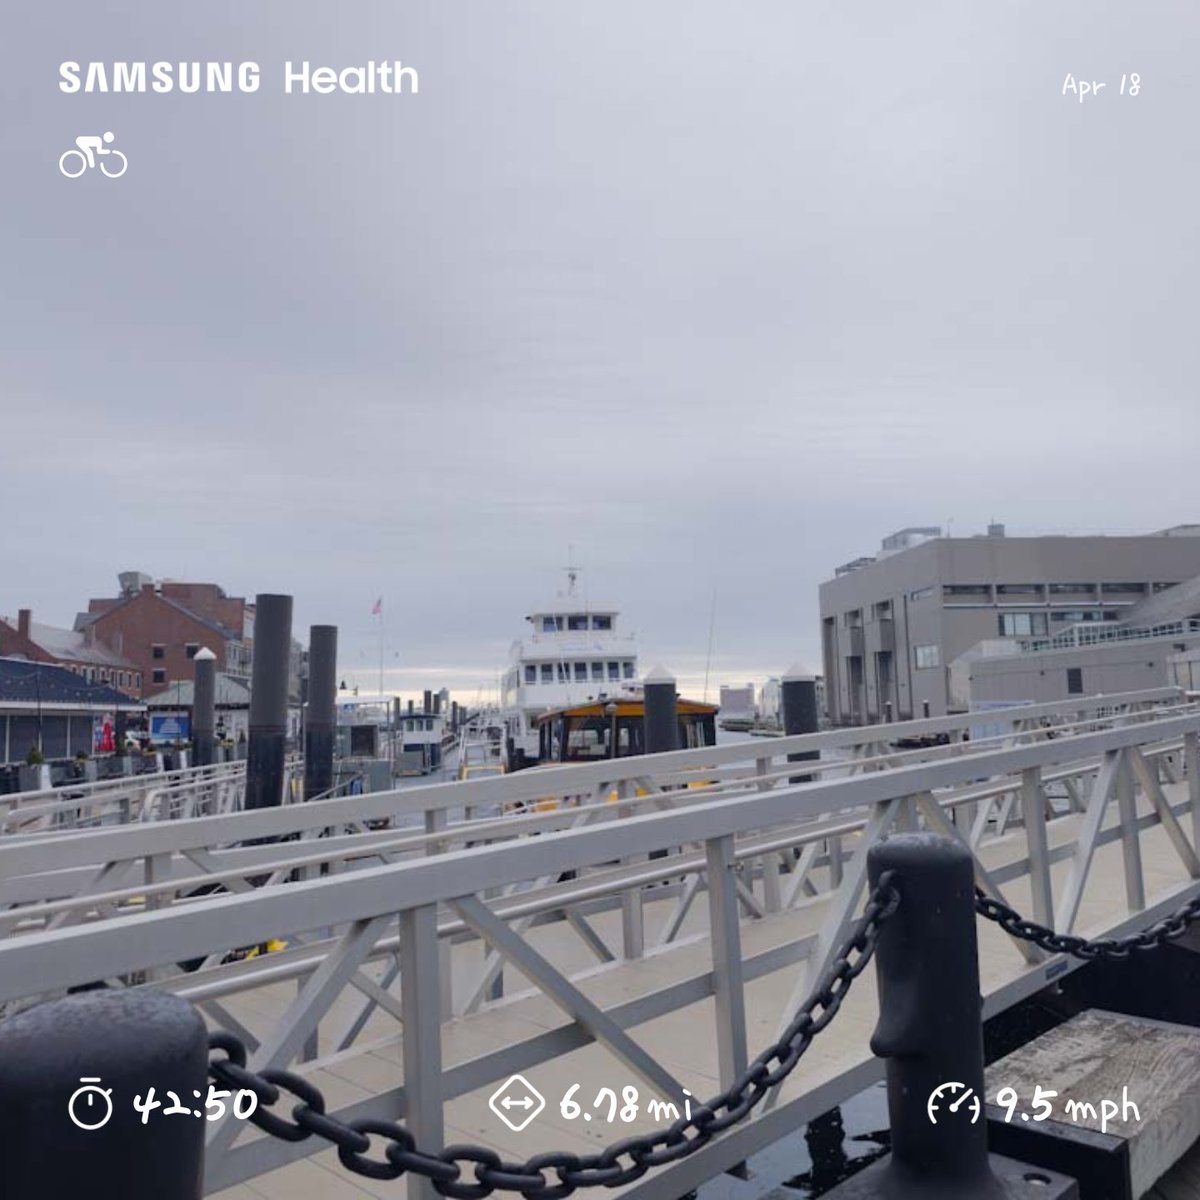 #goodmorning #Boston #CambMA #SomervilleMA! 6.78 Miles #cycling! #bike #commutebybike #gogreen #ecofriendly #healthymobility #activetravel #fitfather/#healthydaddy/#dadbod/#fitboss #thisis43 #fitover40 #urbanlife #urbanfitness #realnewenglander. #exercise #fitforlife #fit4life.